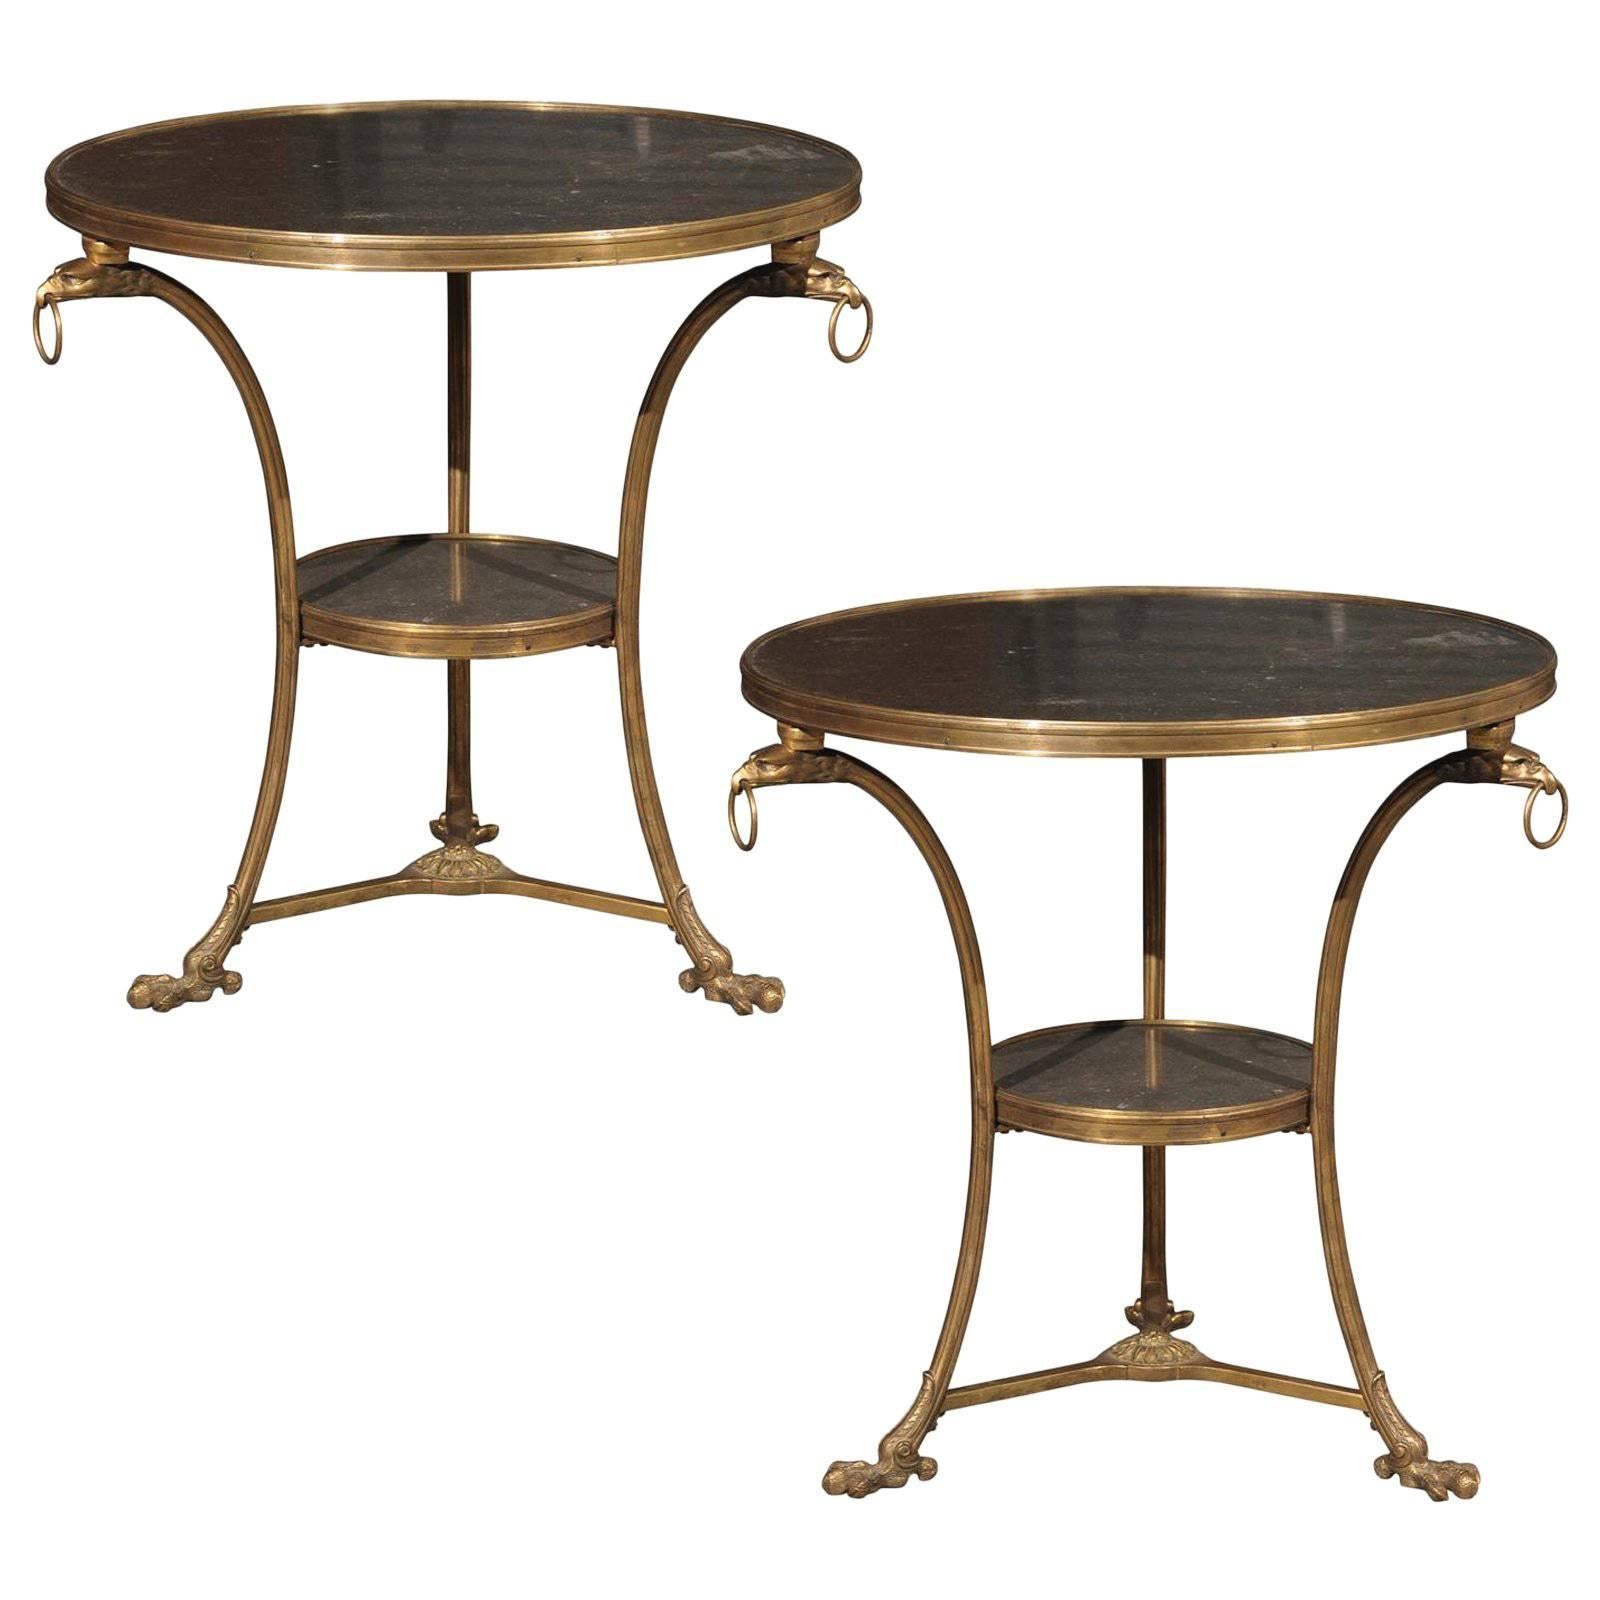 Pair of Gilt Bronze Continental Gueridon Table with Marble Tops